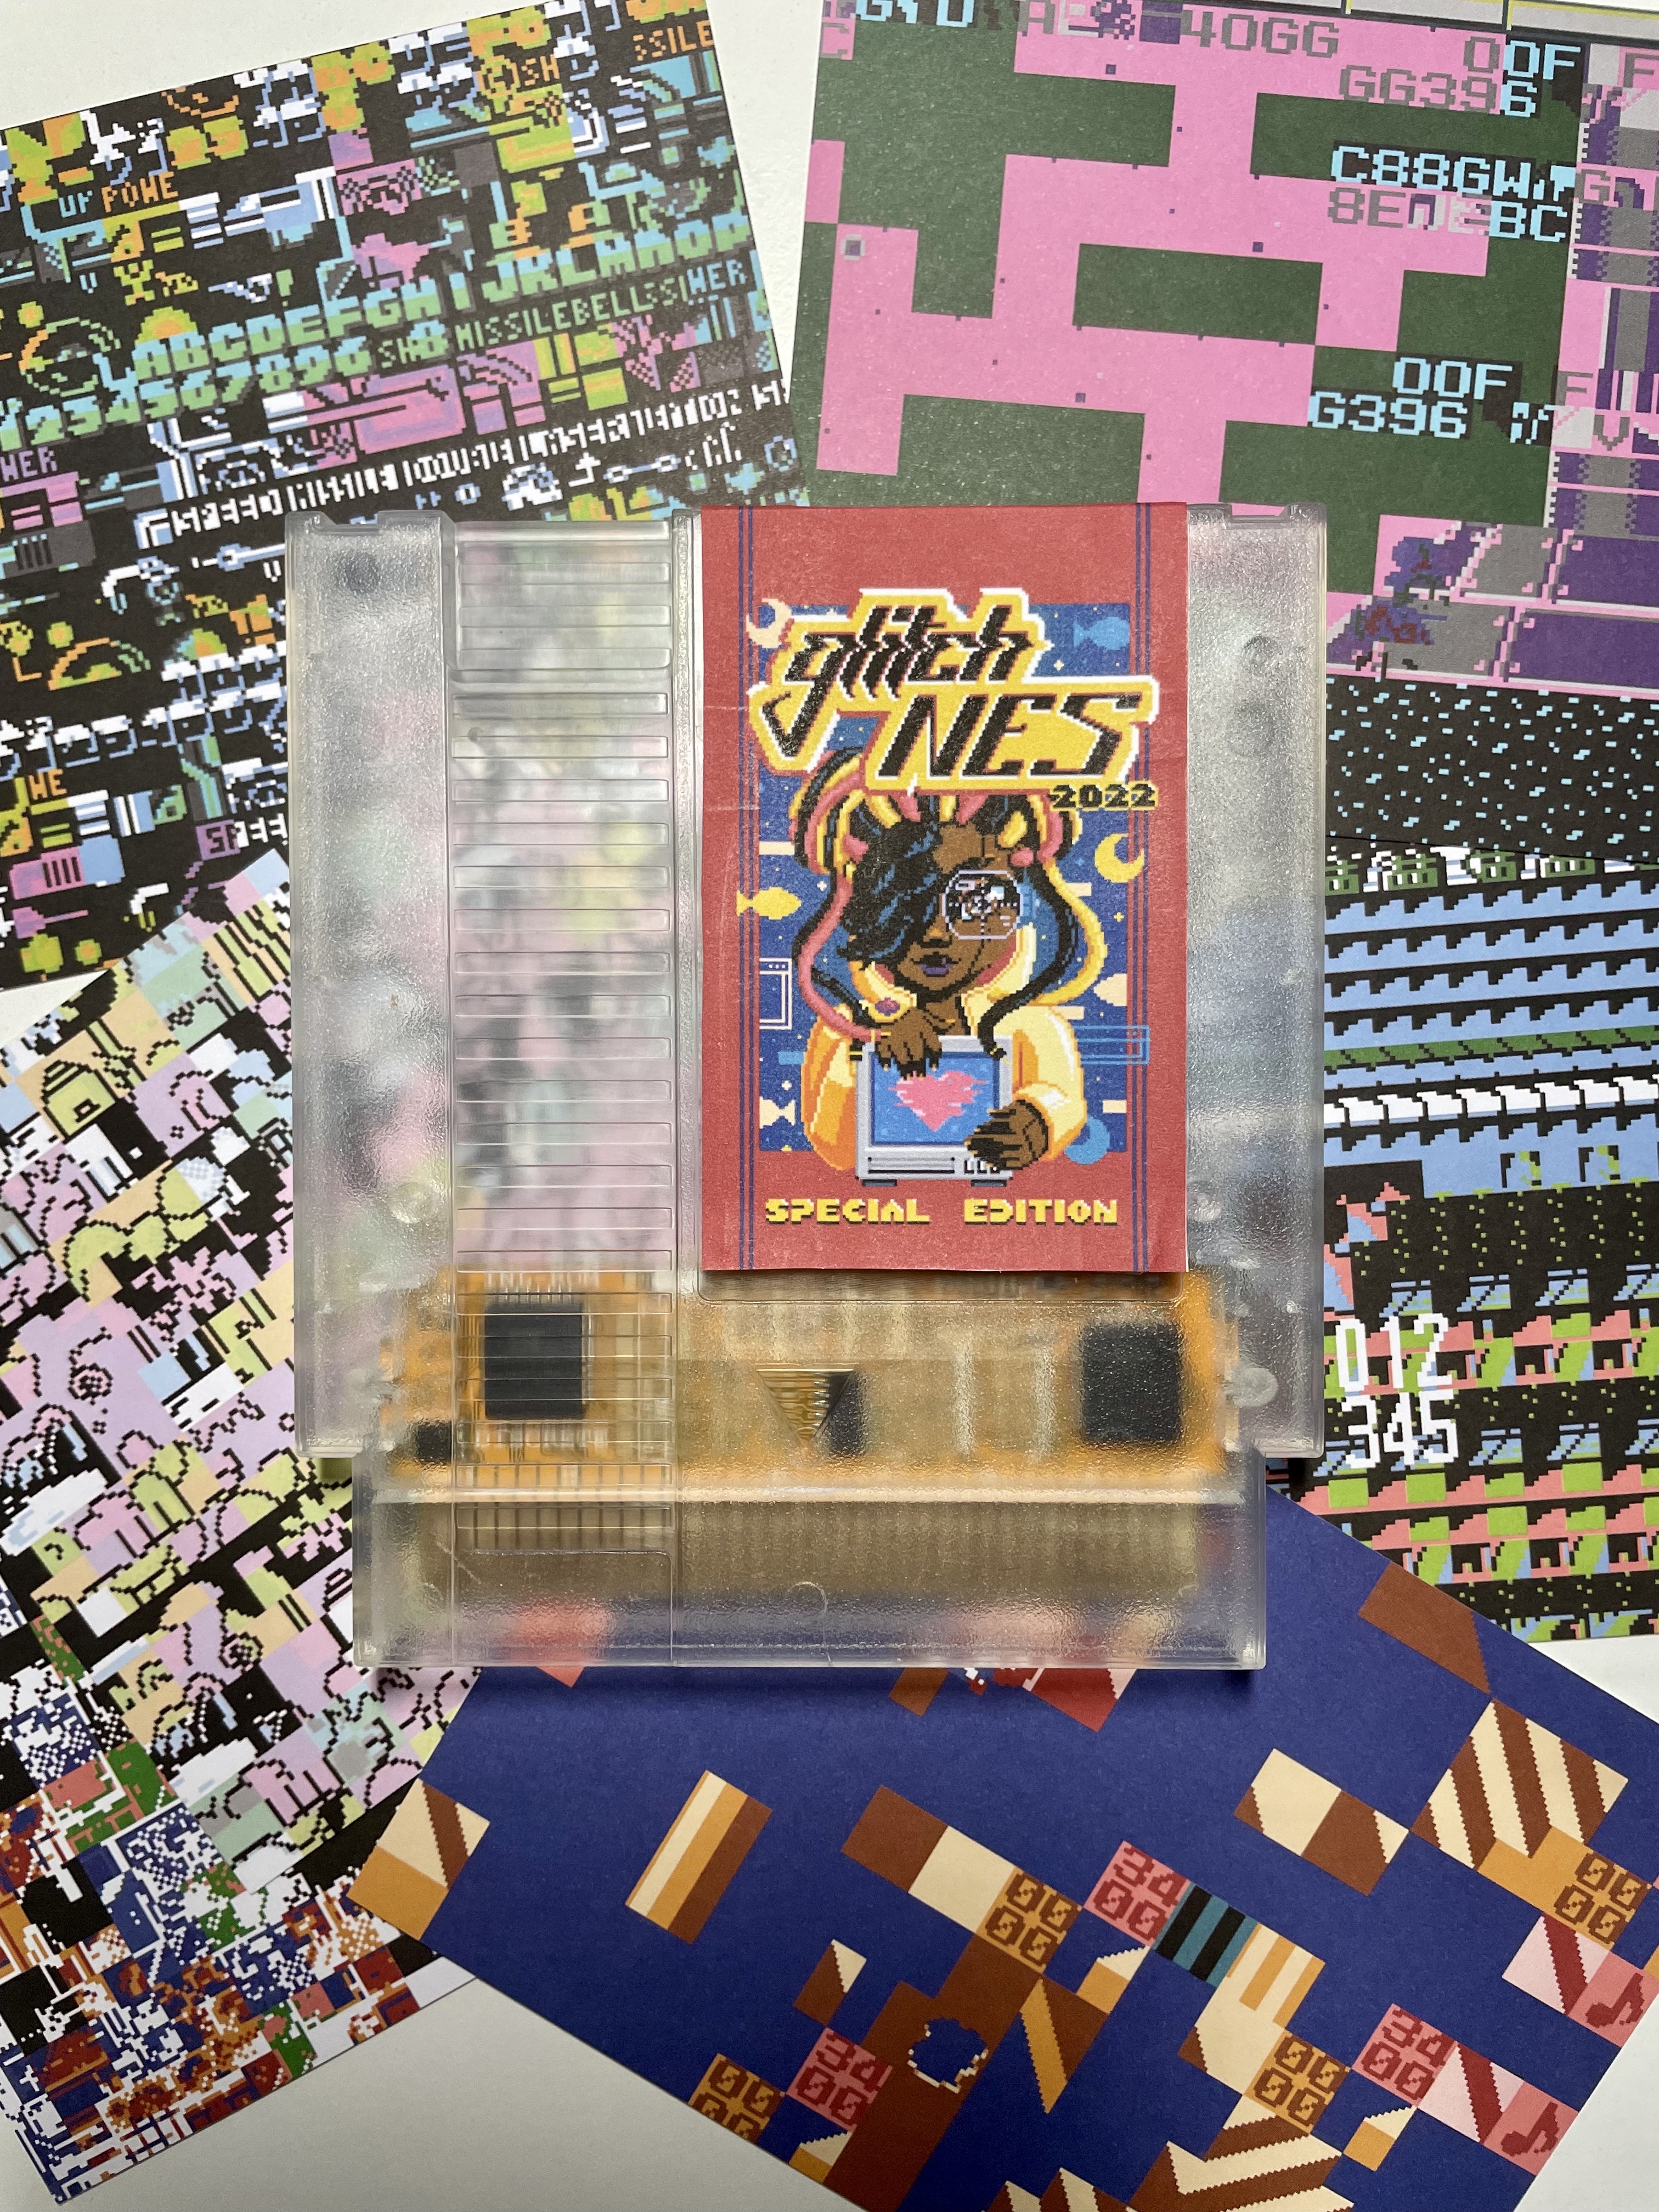 glitchNES 2022 with final label mockup and glitch post cards pictured behind